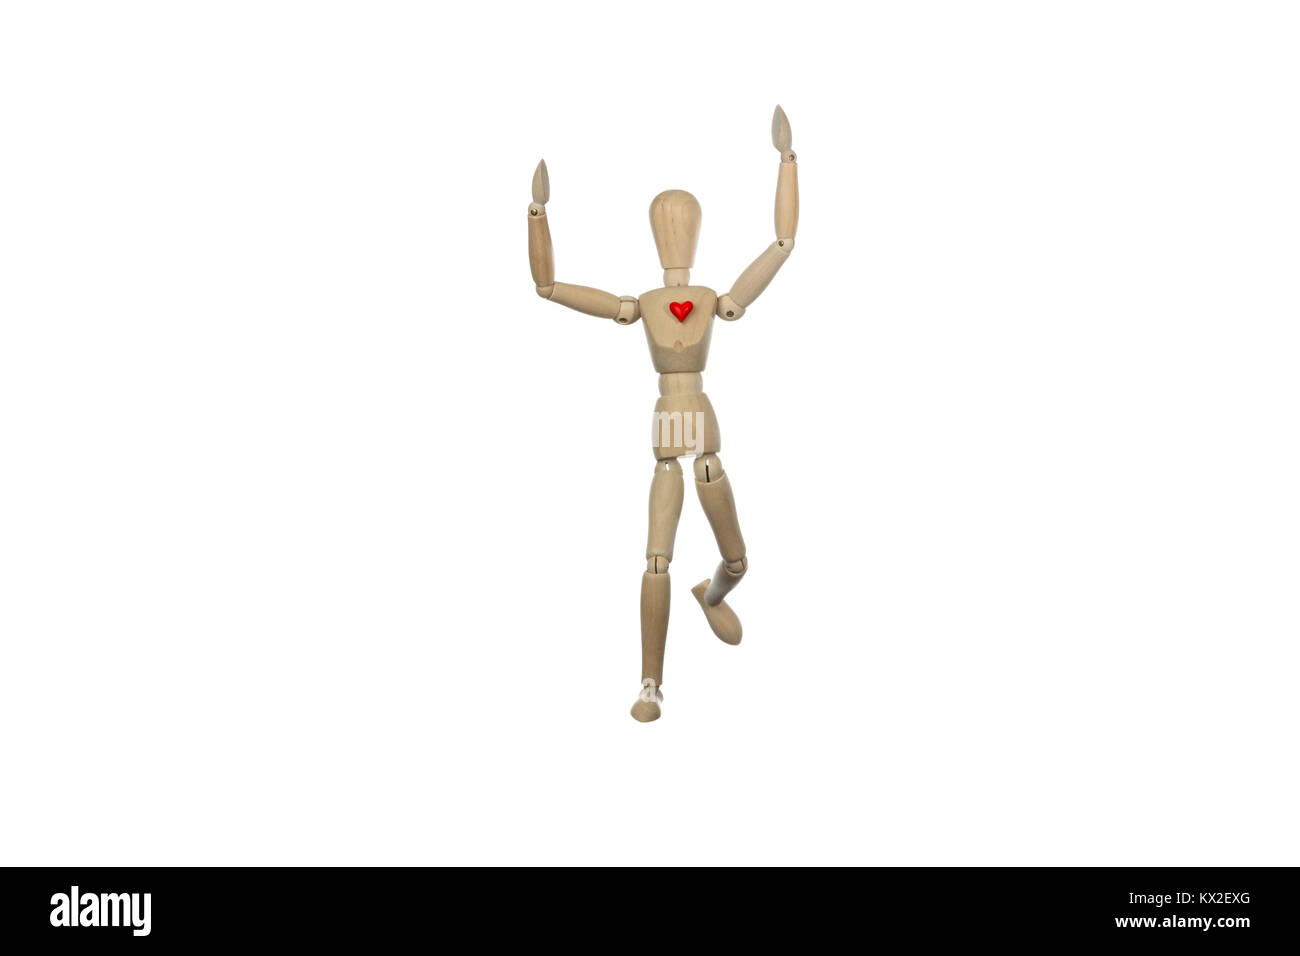 wooden mannequin winning a race with a red heart, conceptual photo about  healthy lifestyle practicing a sport Stock Photo